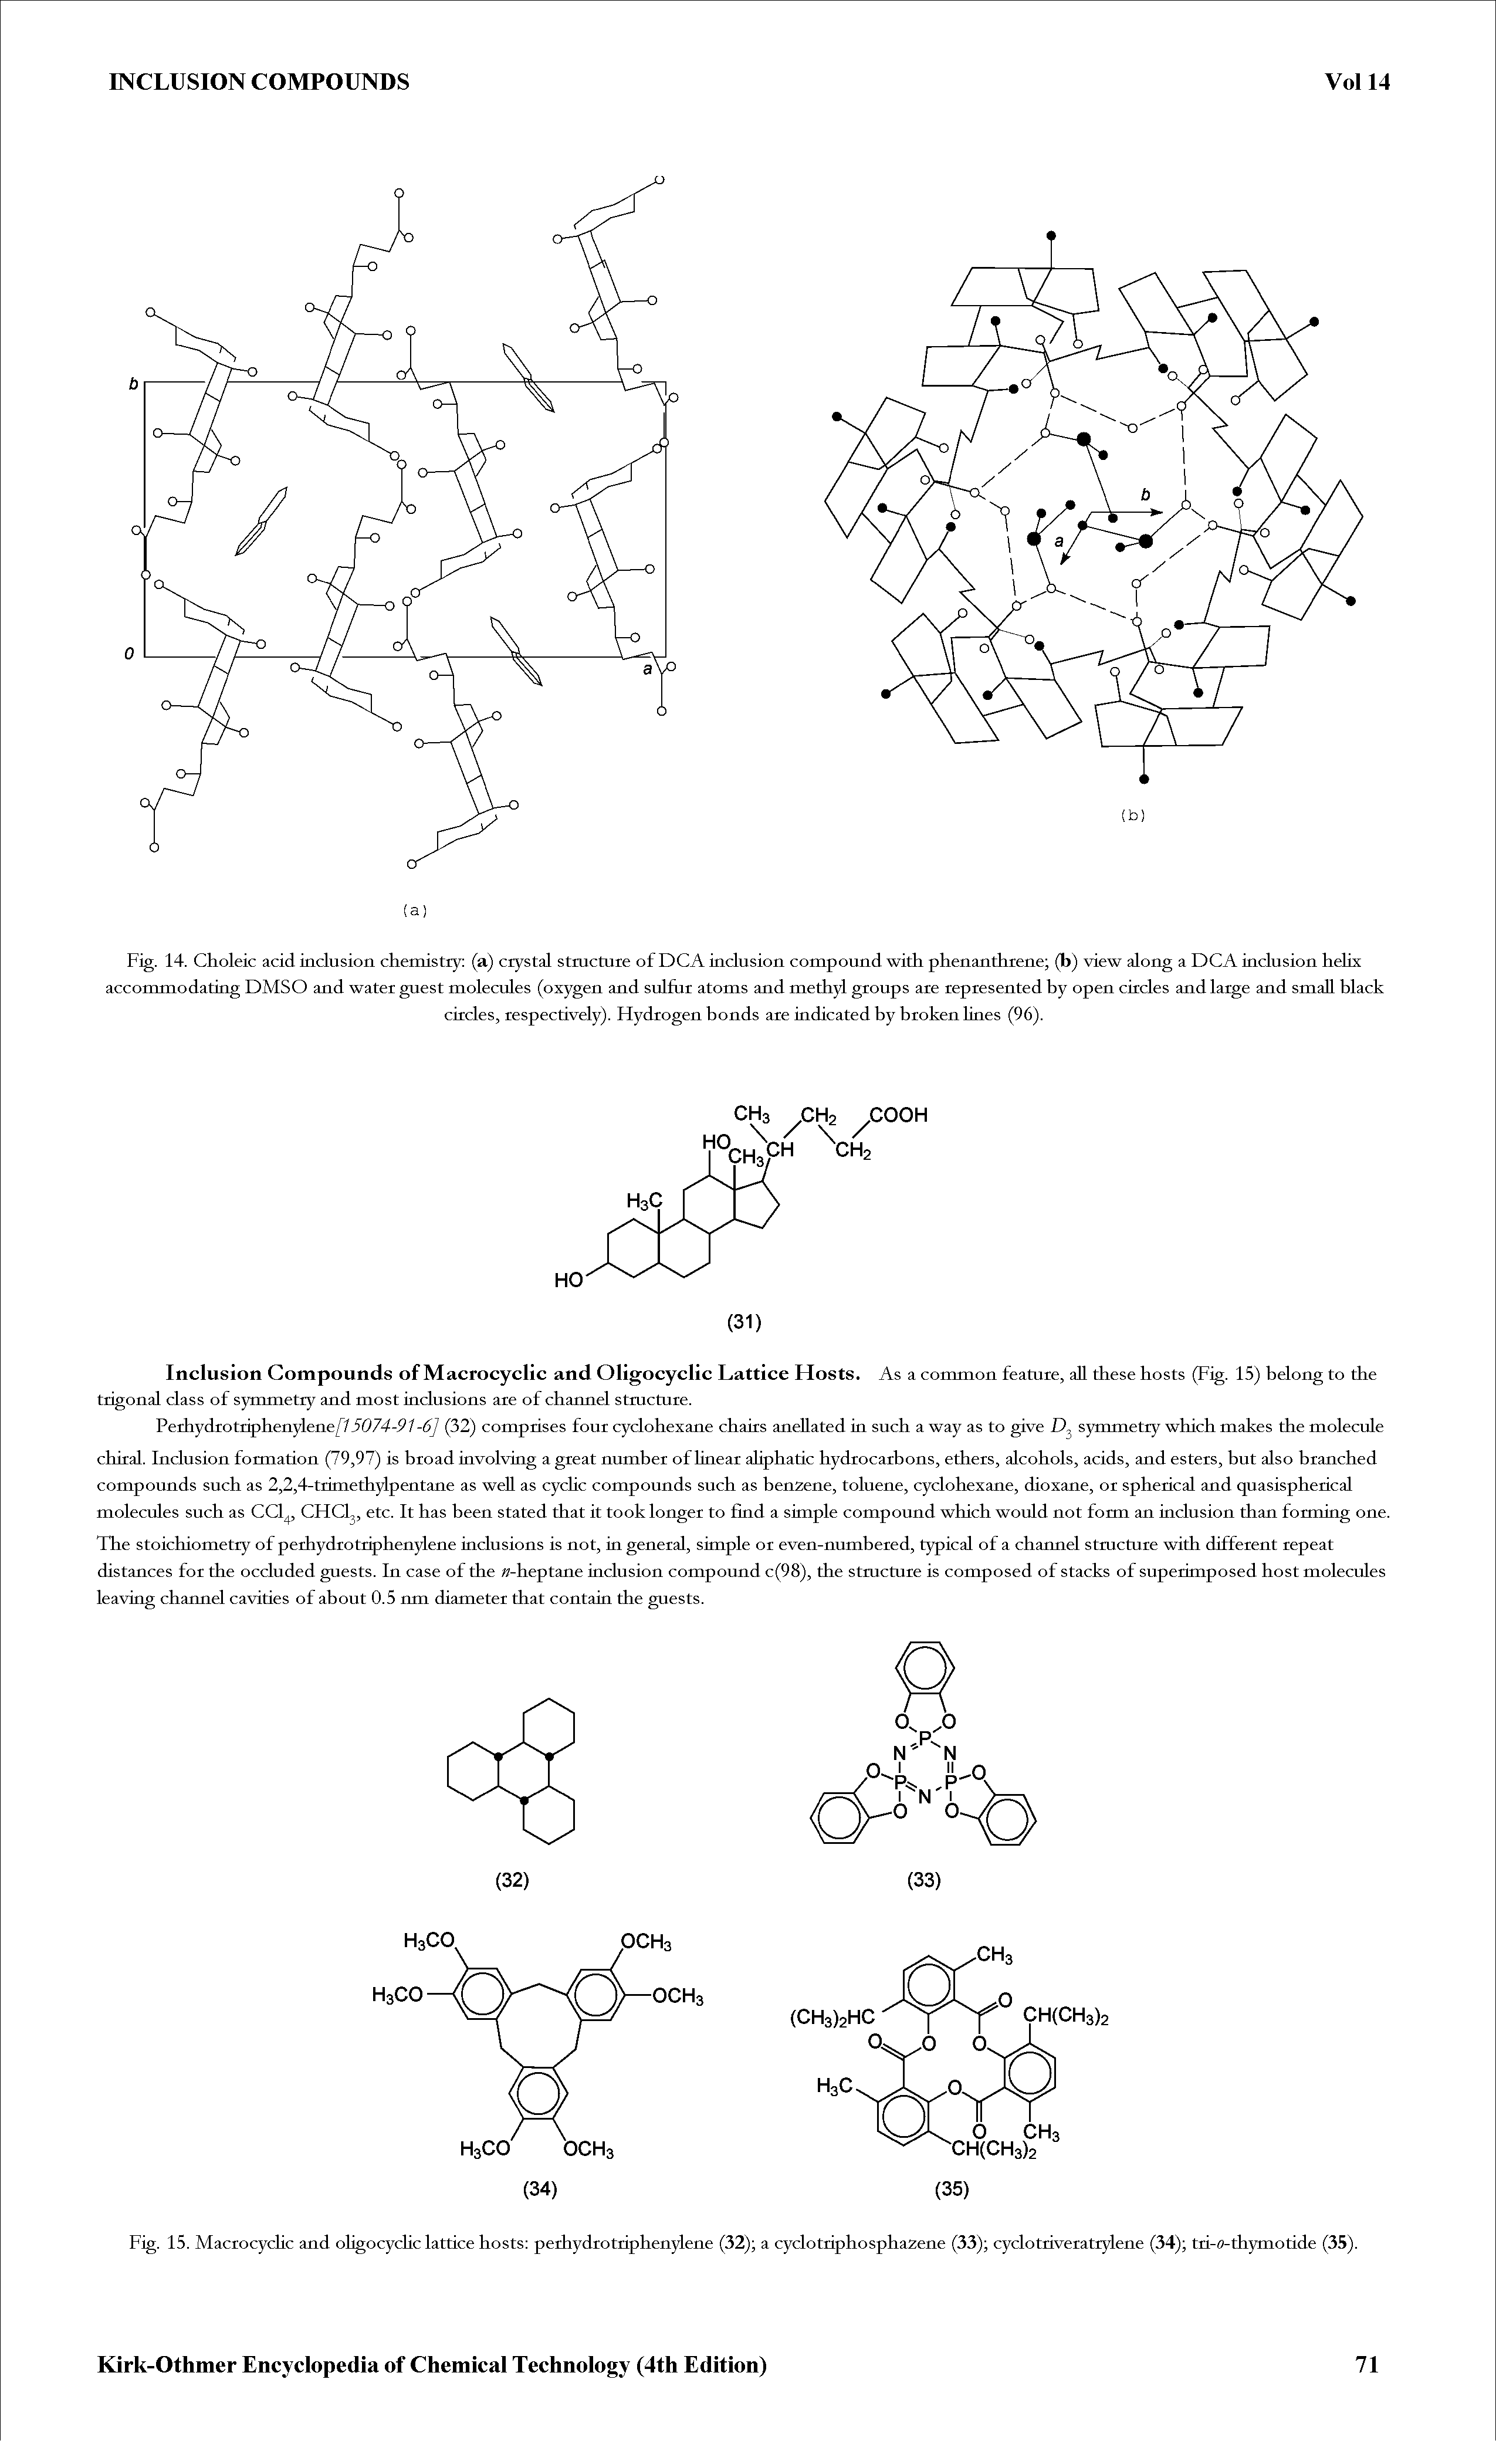 Fig. 14. Choleic acid inclusion chemistry (a) crystal stmcture of DCA inclusion compound with phenanthrene (b) view along a DCA inclusion helix accommodating DMSO and water guest molecules (oxygen and sulfur atoms and methyl groups are represented by open circles and large and small black...